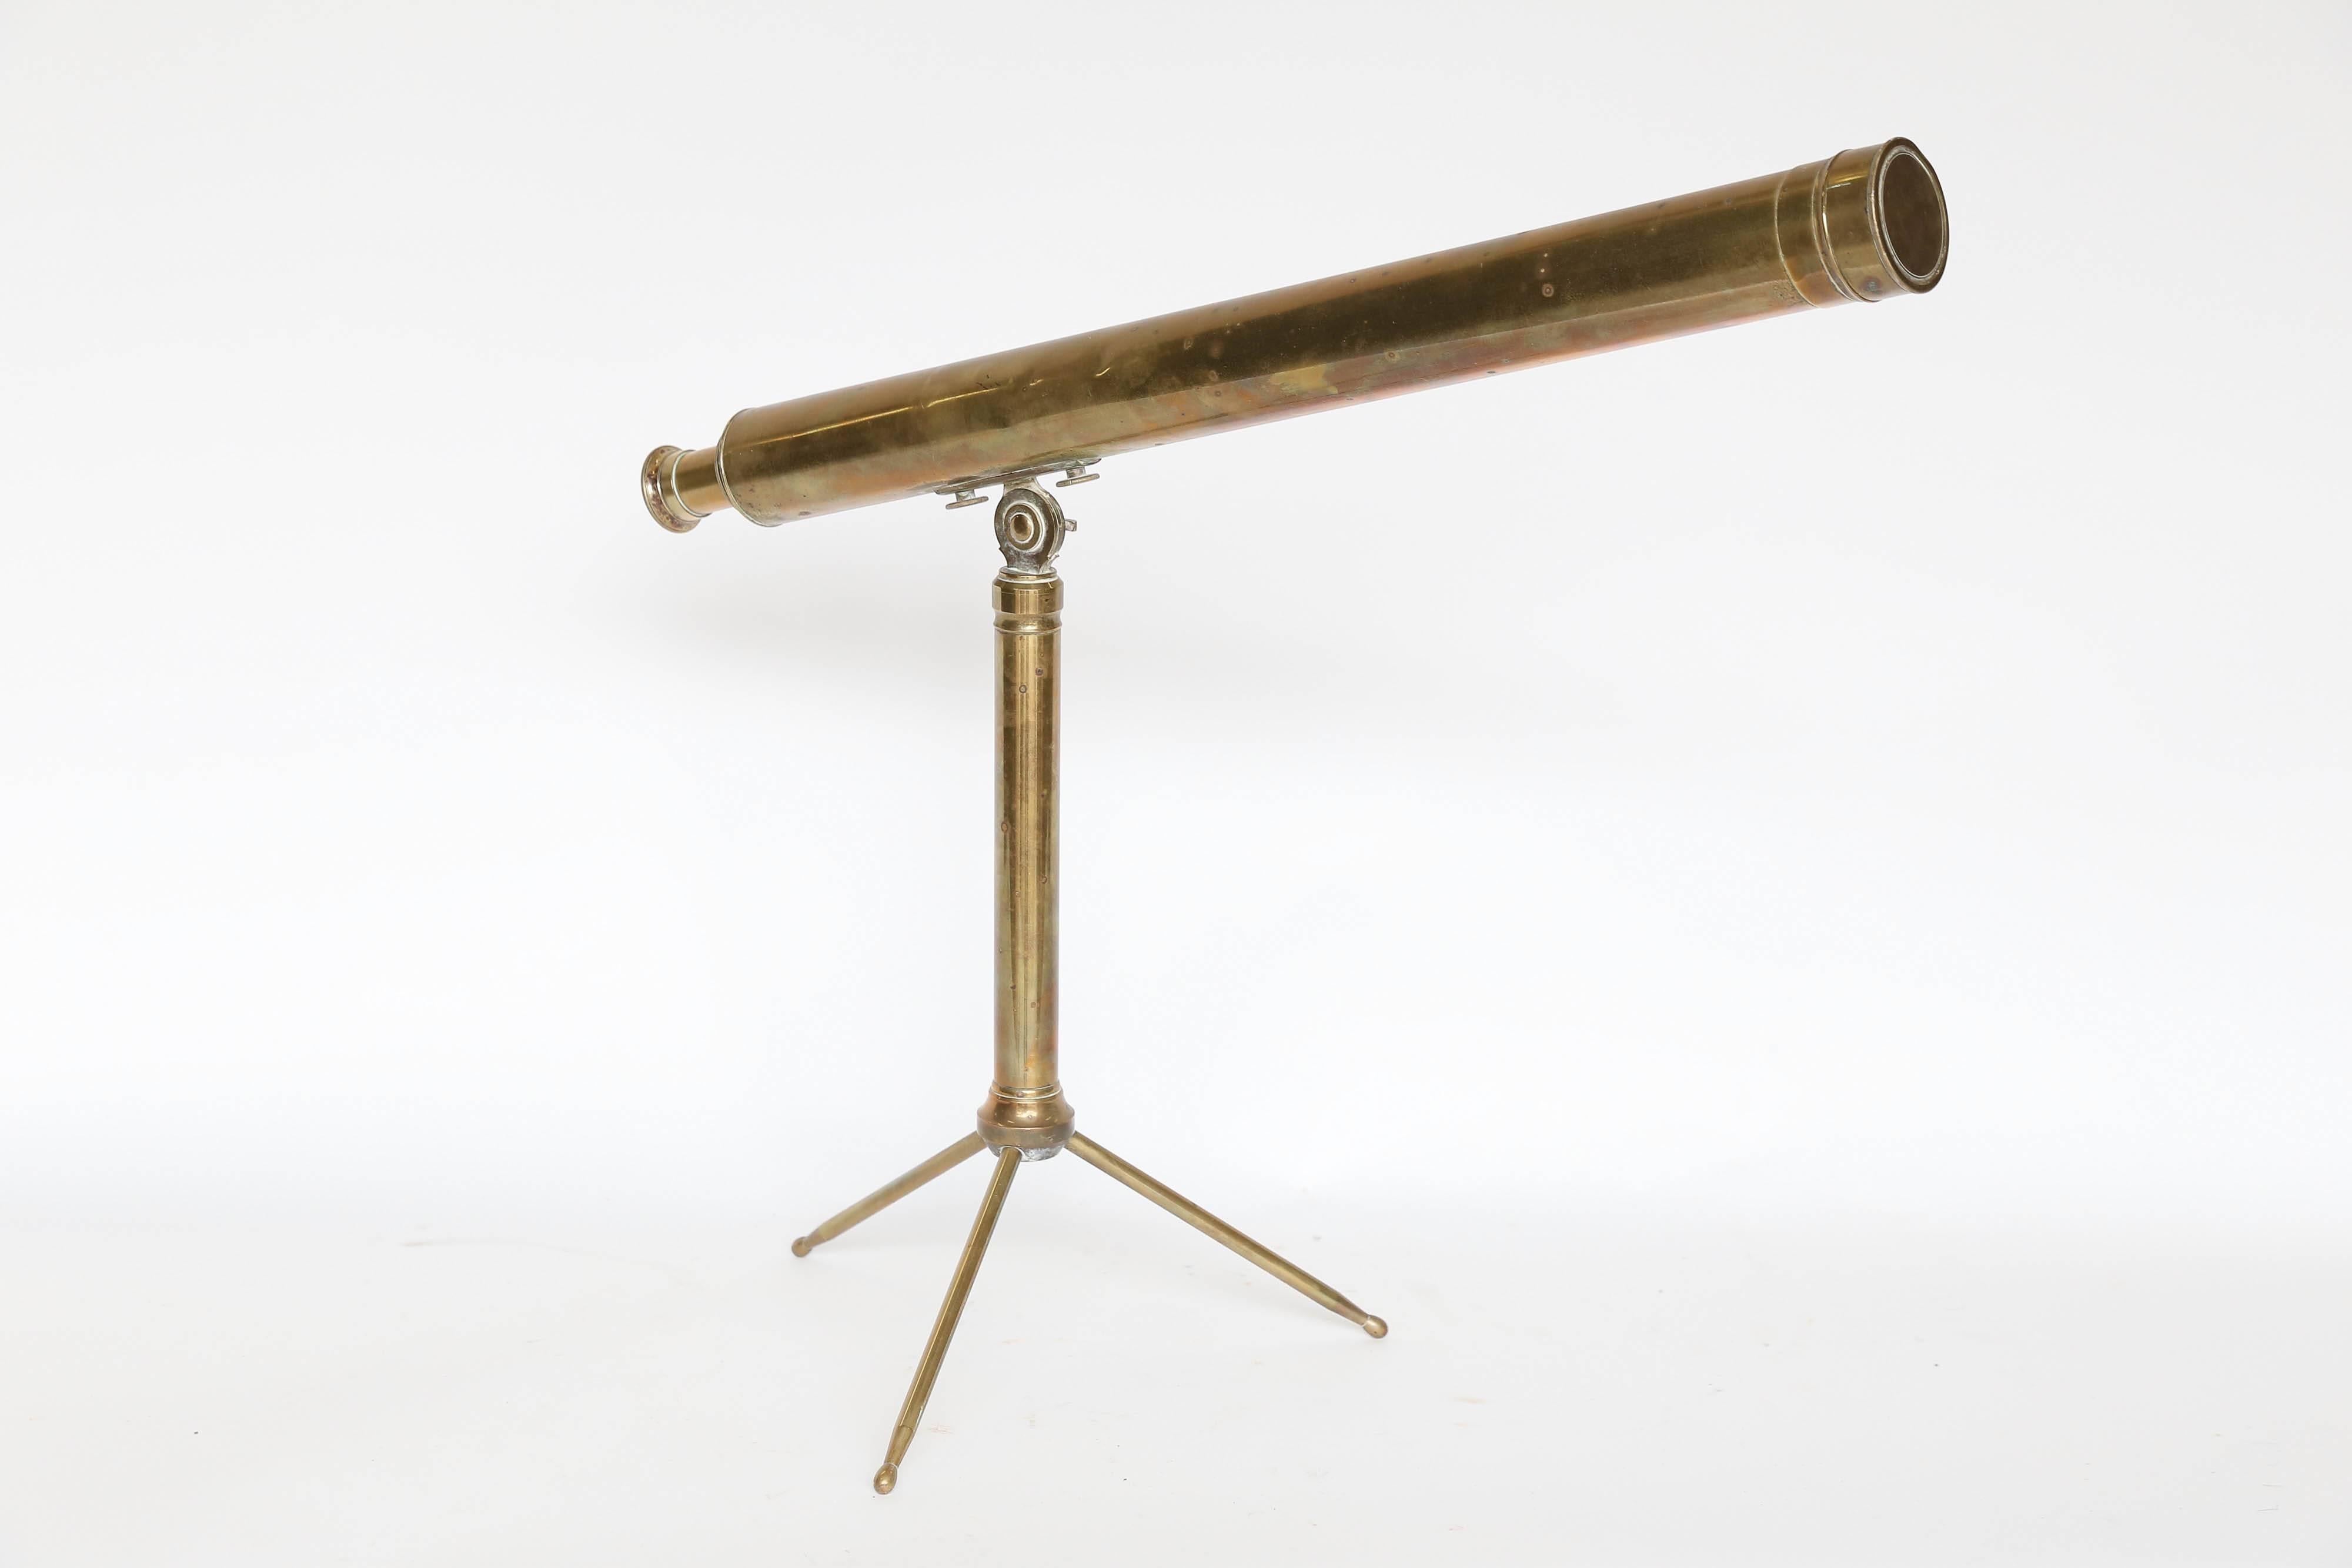 From France, a vintage tabletop telescope made of brass. Standing on a 13-inch tripod stand and rising to 19 inches, the scope is 2.38 inches in diameter and adjusts in length from 25-33 inches. The lens cover is intact and the optics are stable